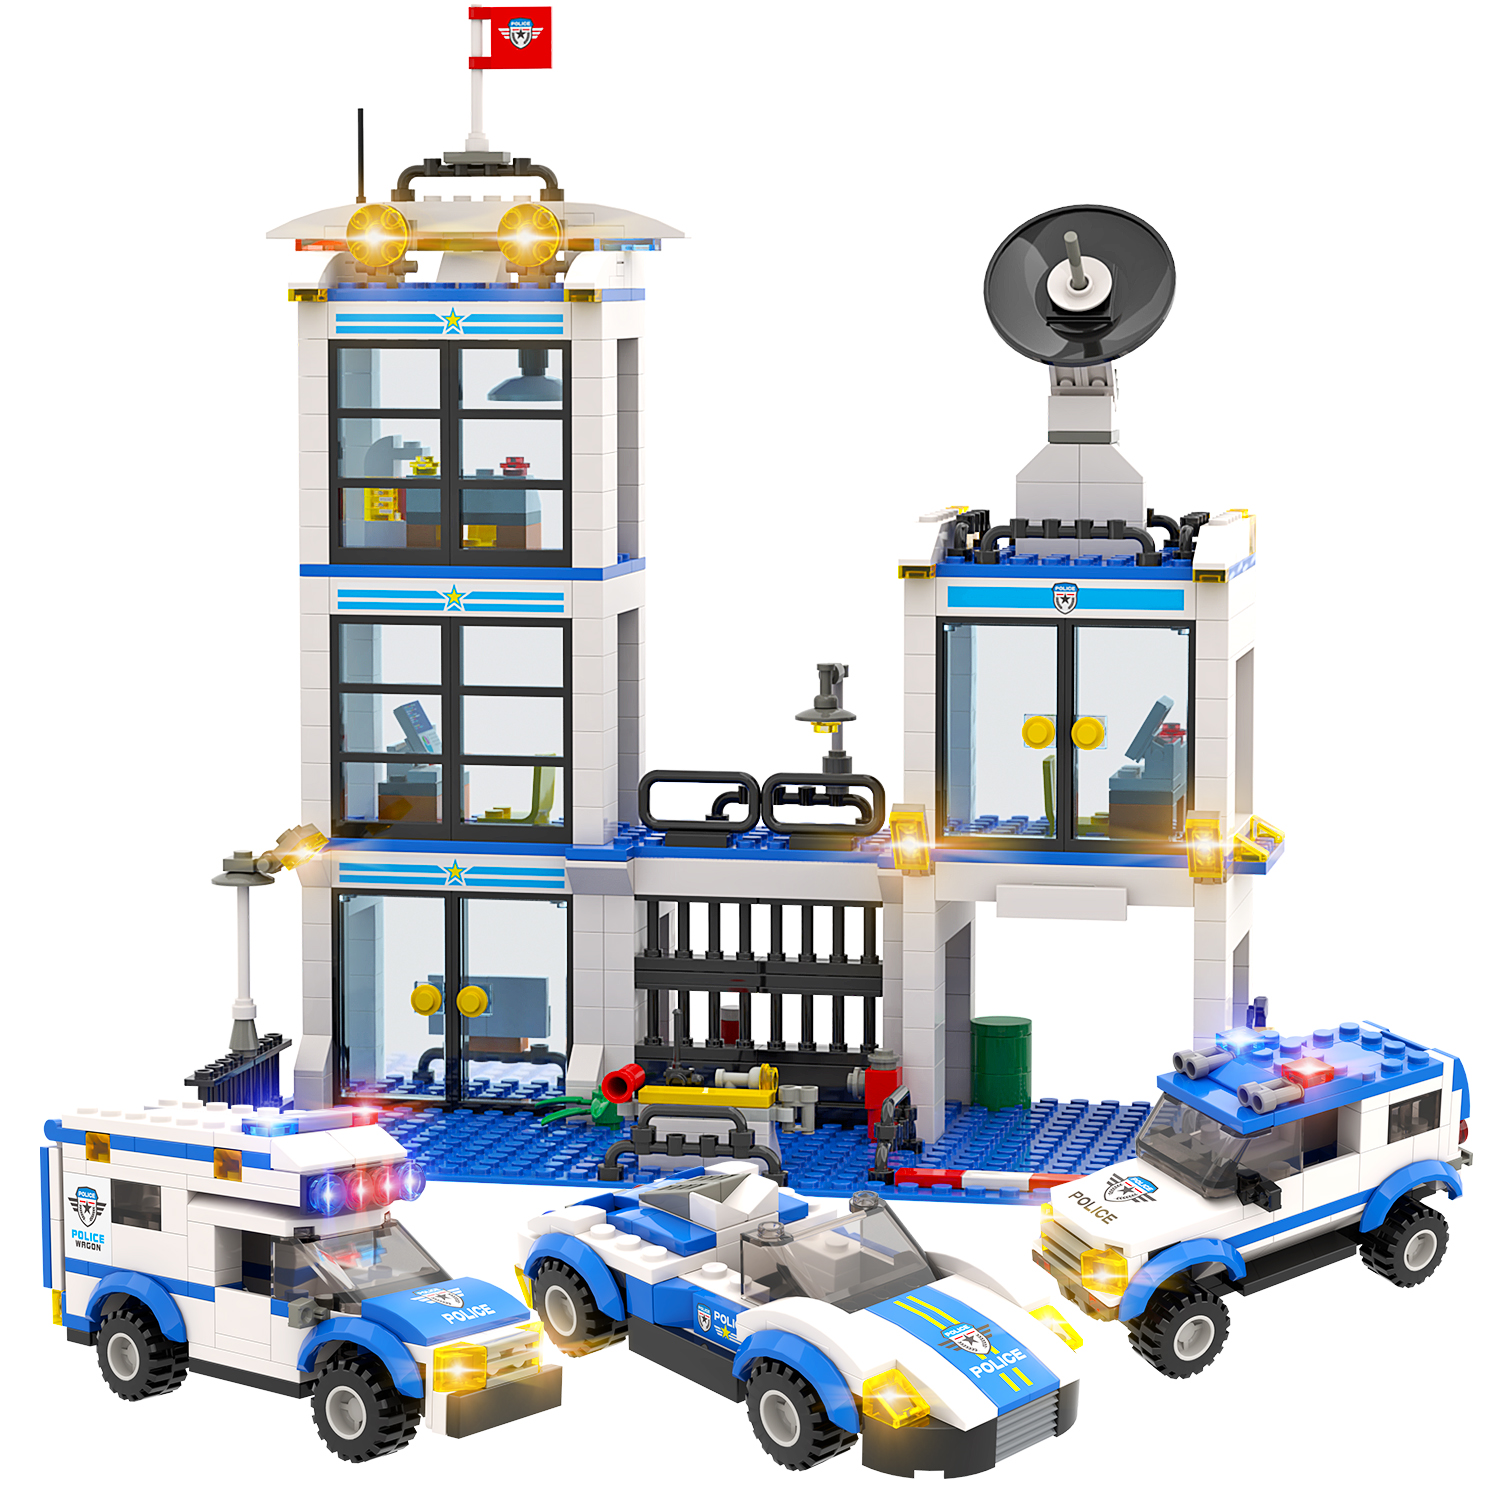 Police Dept Patrol Unit Construction Blocks My Blox Compatible With Other Brands for sale online 